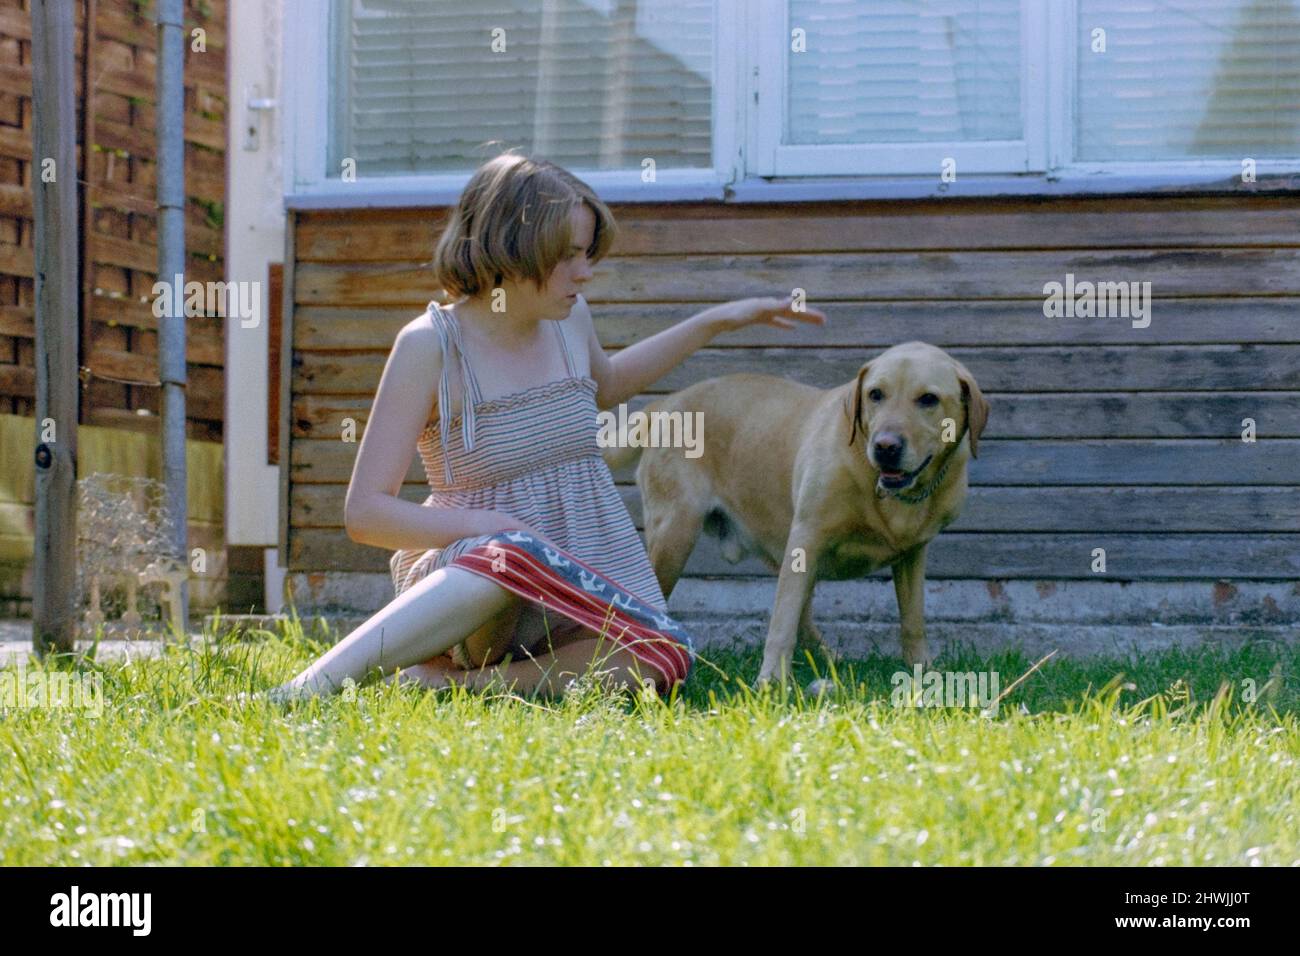 pretty young woman with blonde bob haircut and light summer dress fashionable in the early 1980s pats her dog in garden rugby england uk Stock Photo